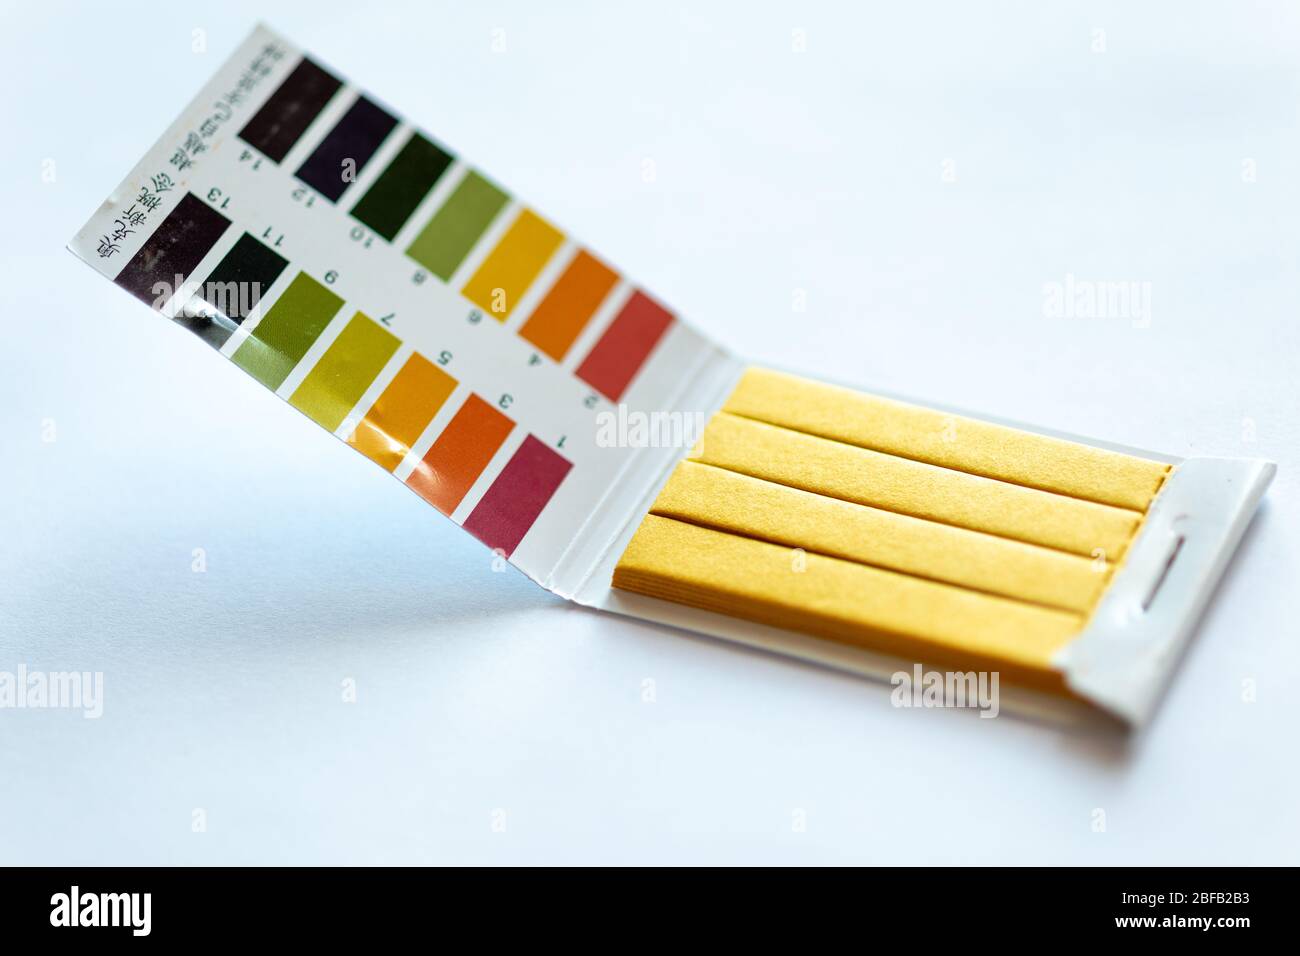 Universal Litmus pH test and color scale on white background Stock Photo